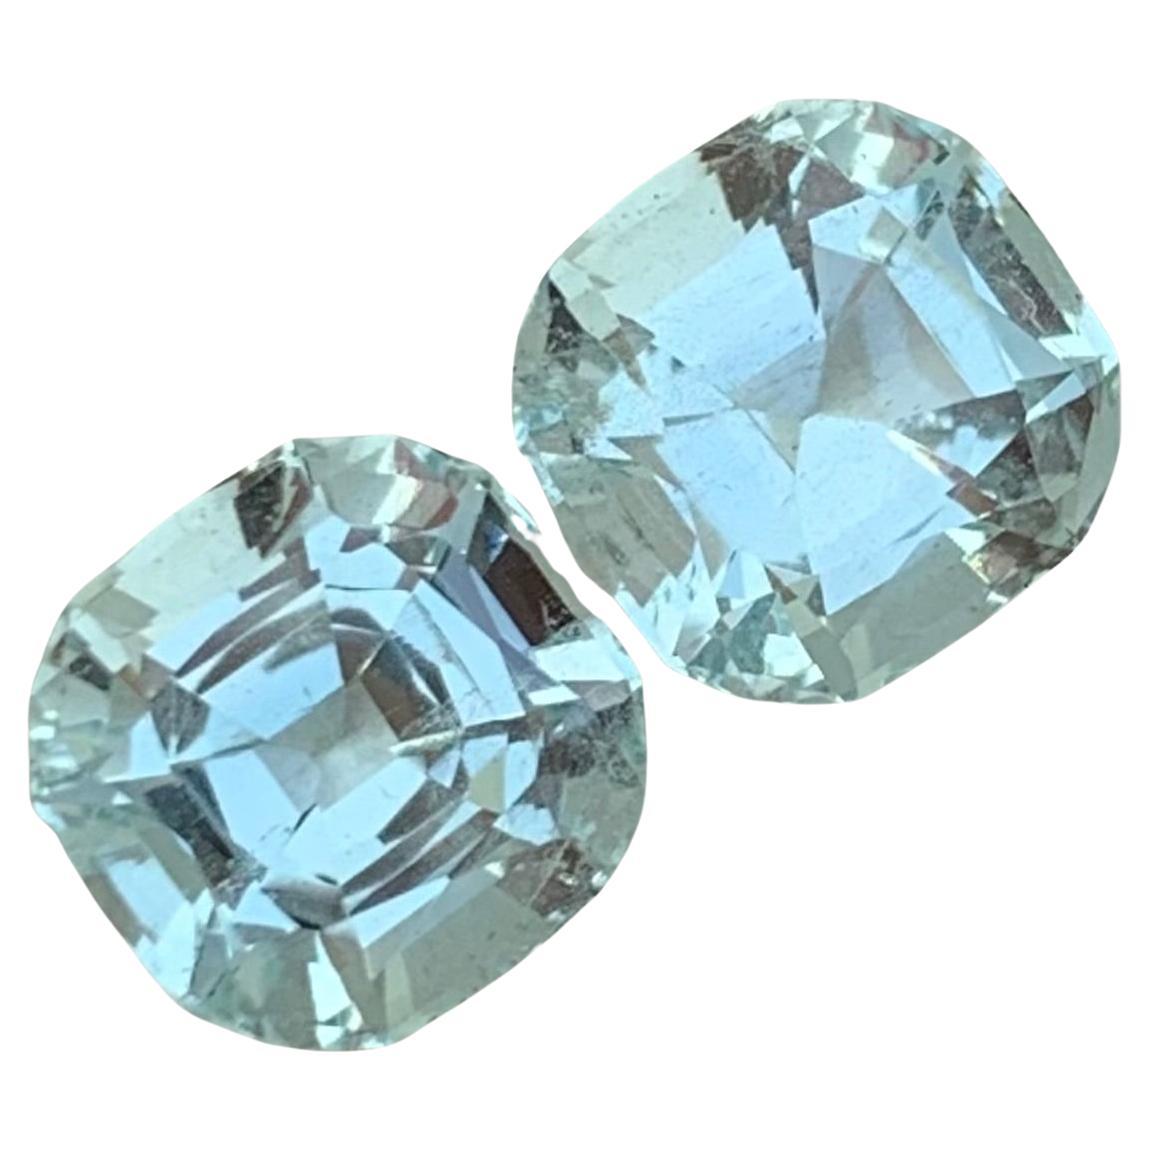 4.95 Carats Naturel Loose Slightly Included Aquamarine Pair For Earrings 